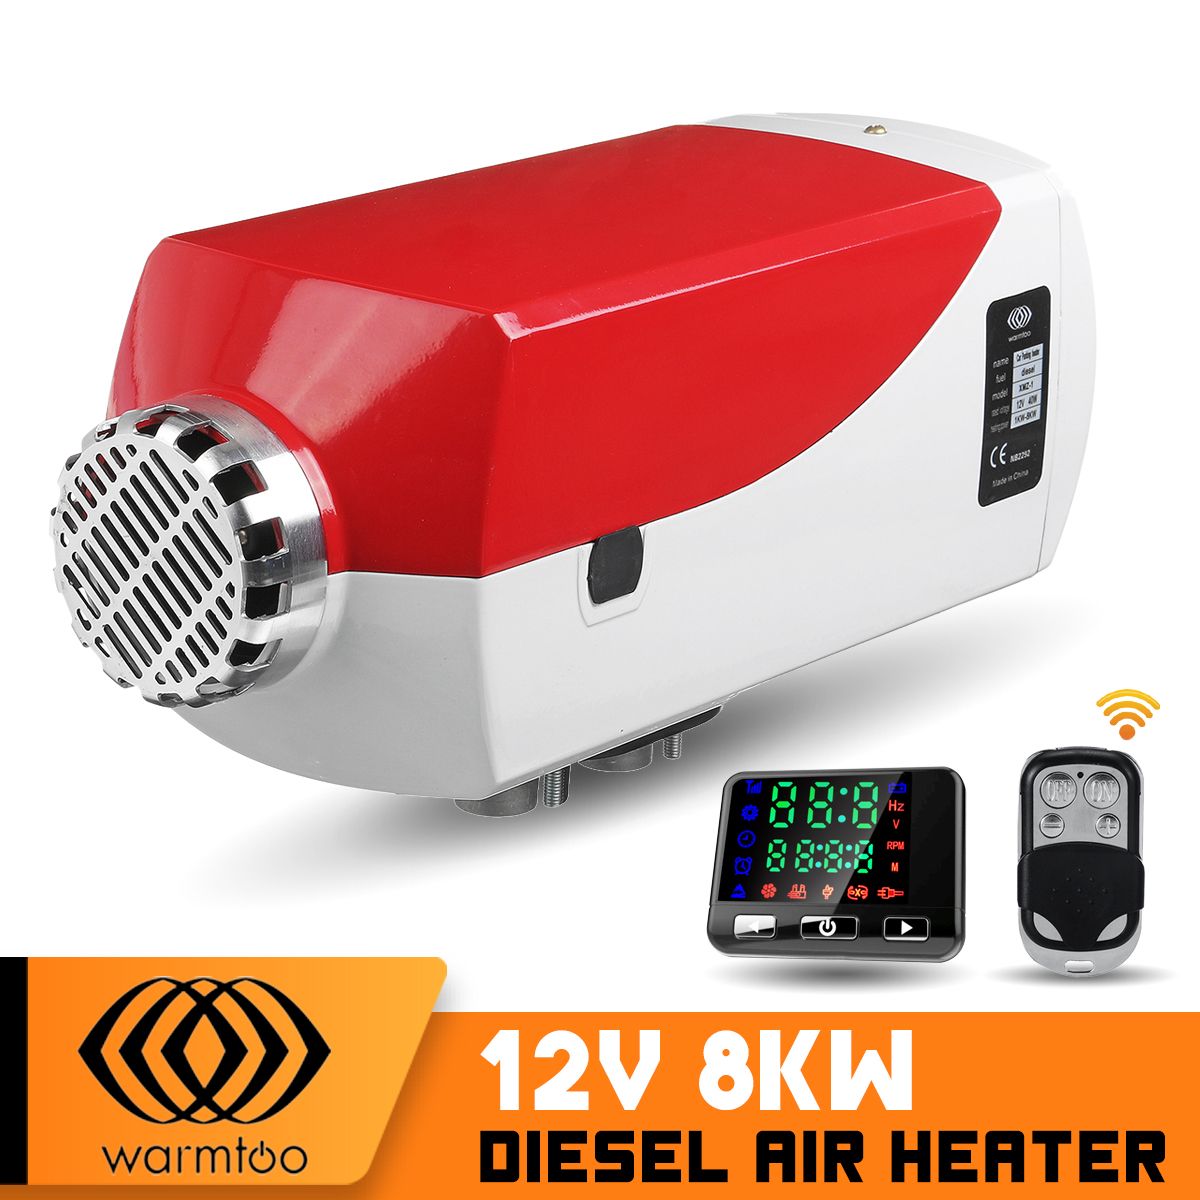 12V-8KW-Diesel-Air-Heater-Car-Parking-Heater-Black-LCD-Thermostat-with-Remote-Control-1557475